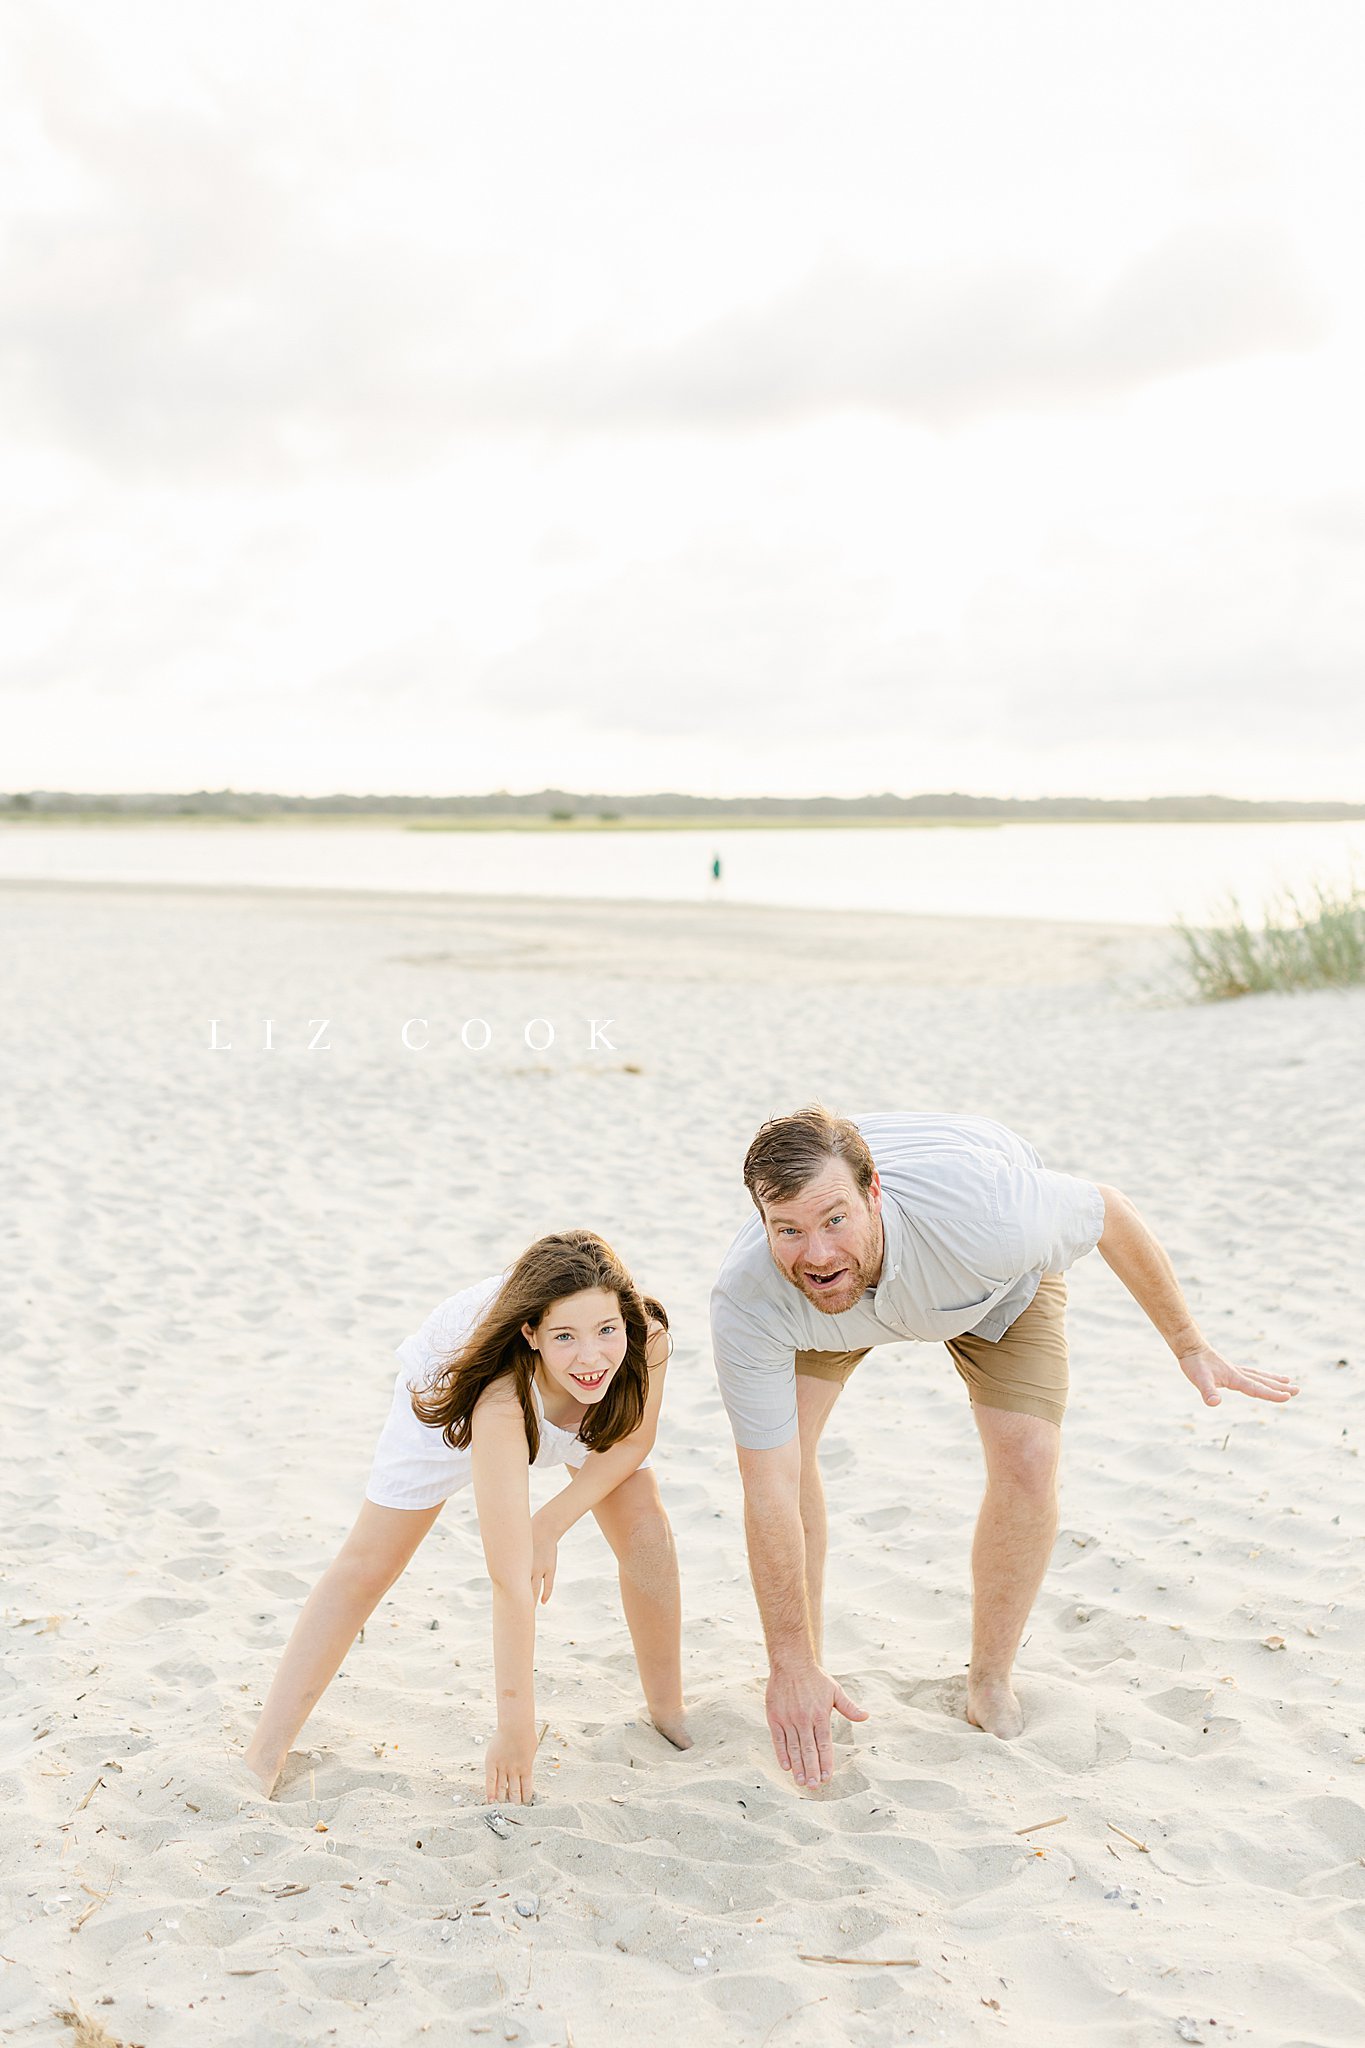 maternity-pictures-on-beach-liz-cook-photography-caroline-jean-photography_0008.jpg